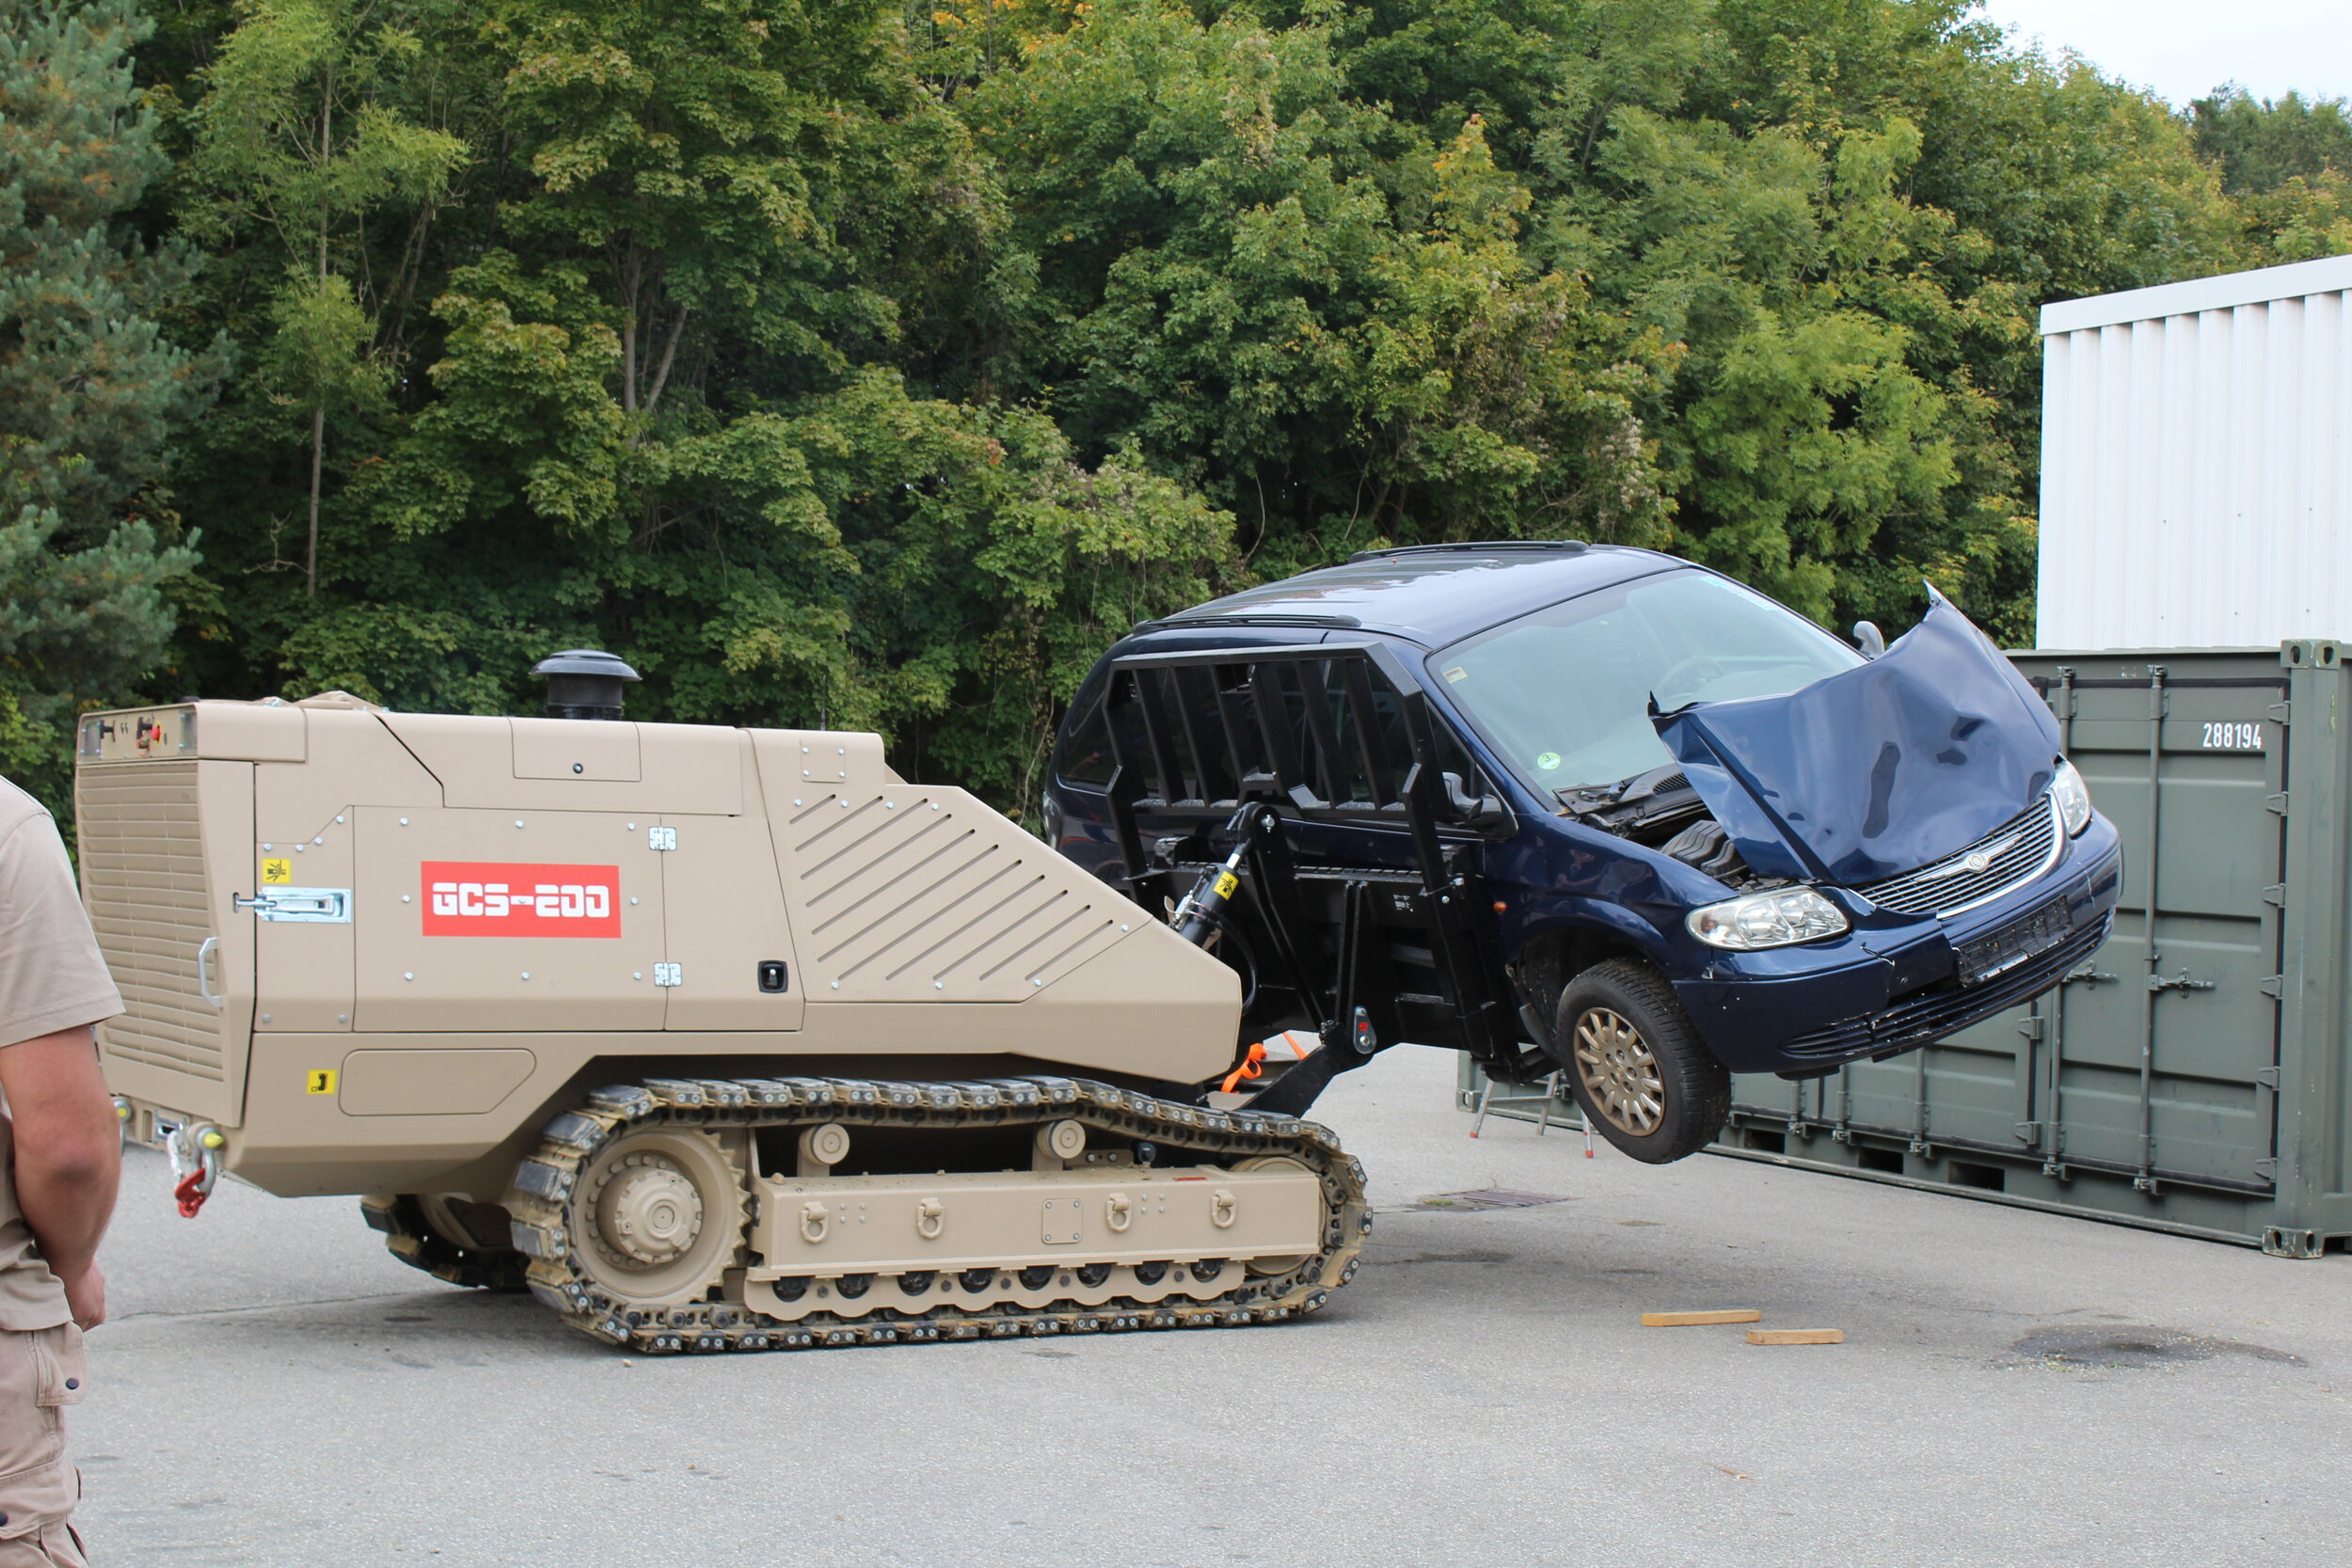  The GCS-200 removes a car in an IED scenario with the pallet fork 